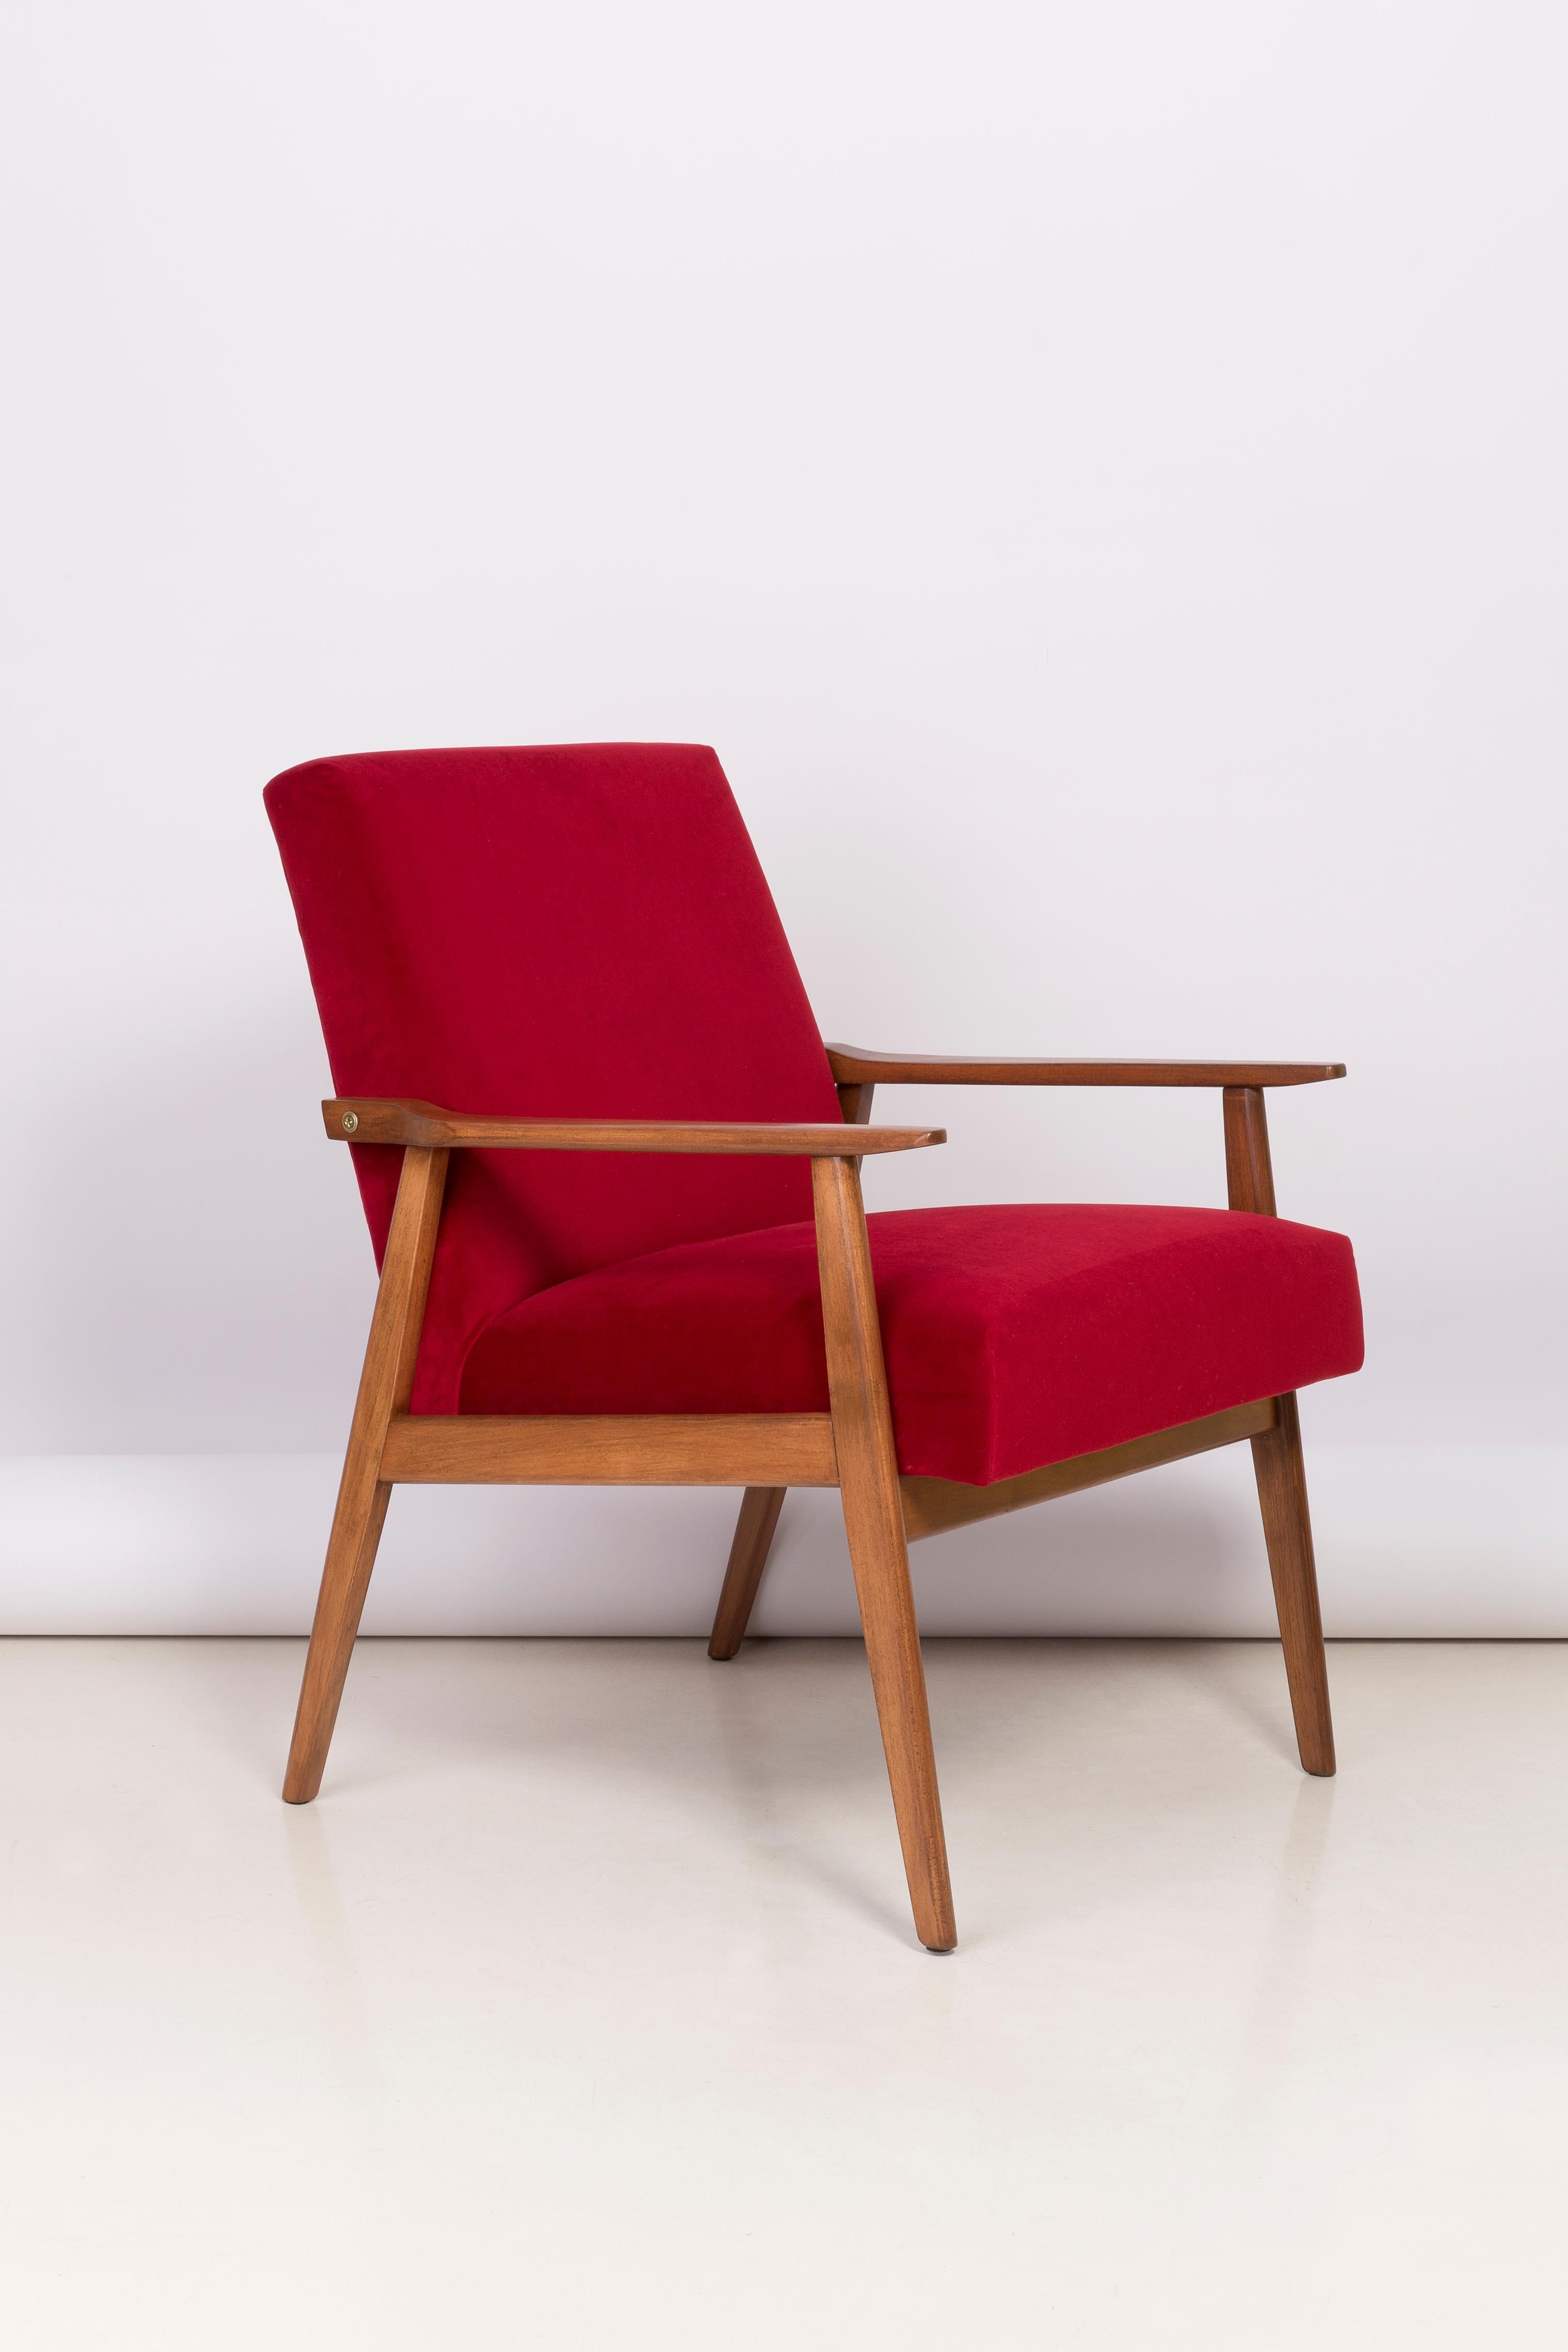 A beautiful, restored armchair designed by Henryk Lis. Furniture after full carpentry and upholstery renovation. The fabric, which is covered with a backrest and a seat, is a high-quality red velvet upholstery (color 2926). The armchairs will be